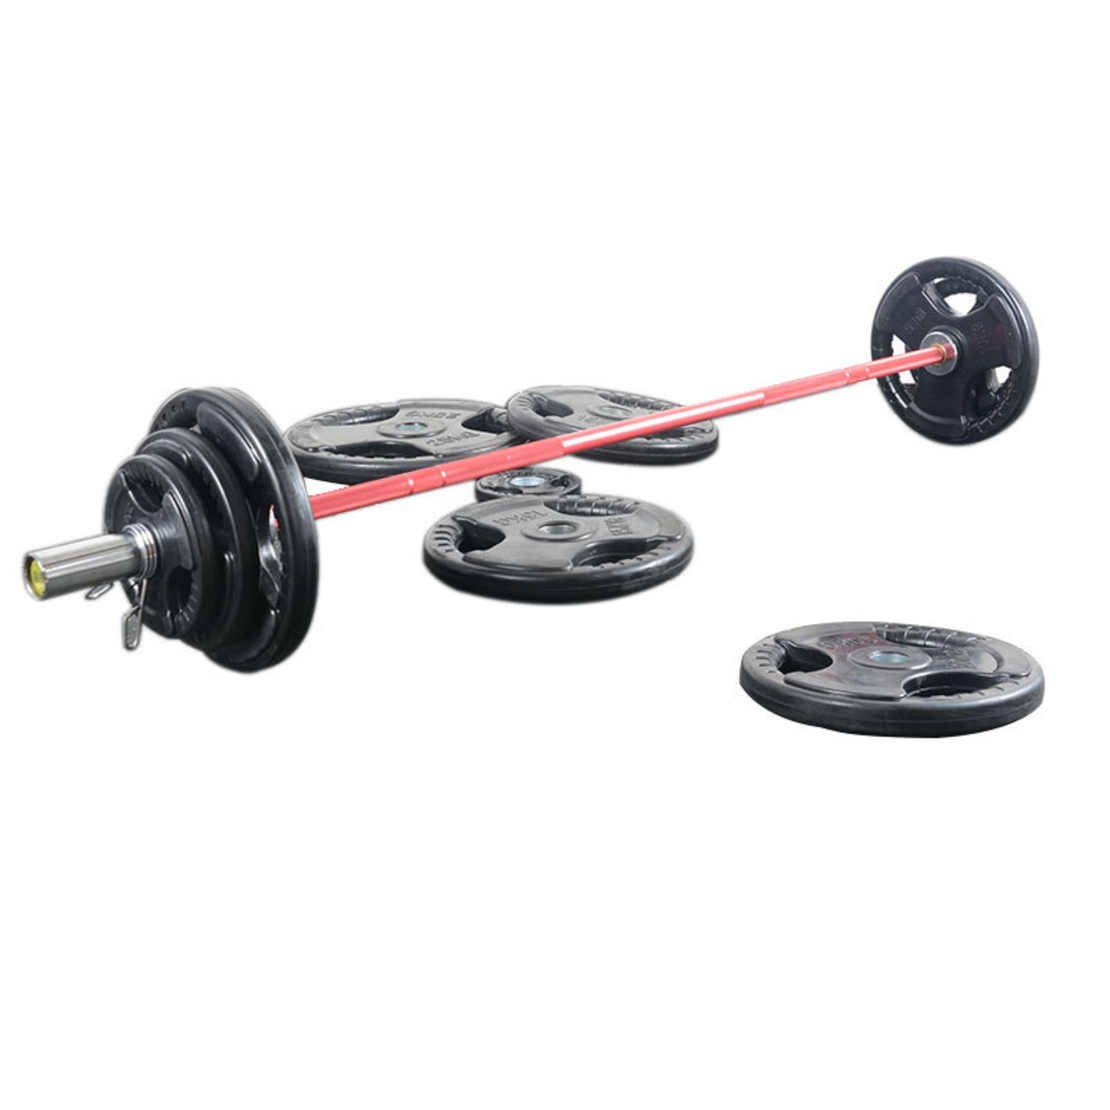  weight plate 5 kg